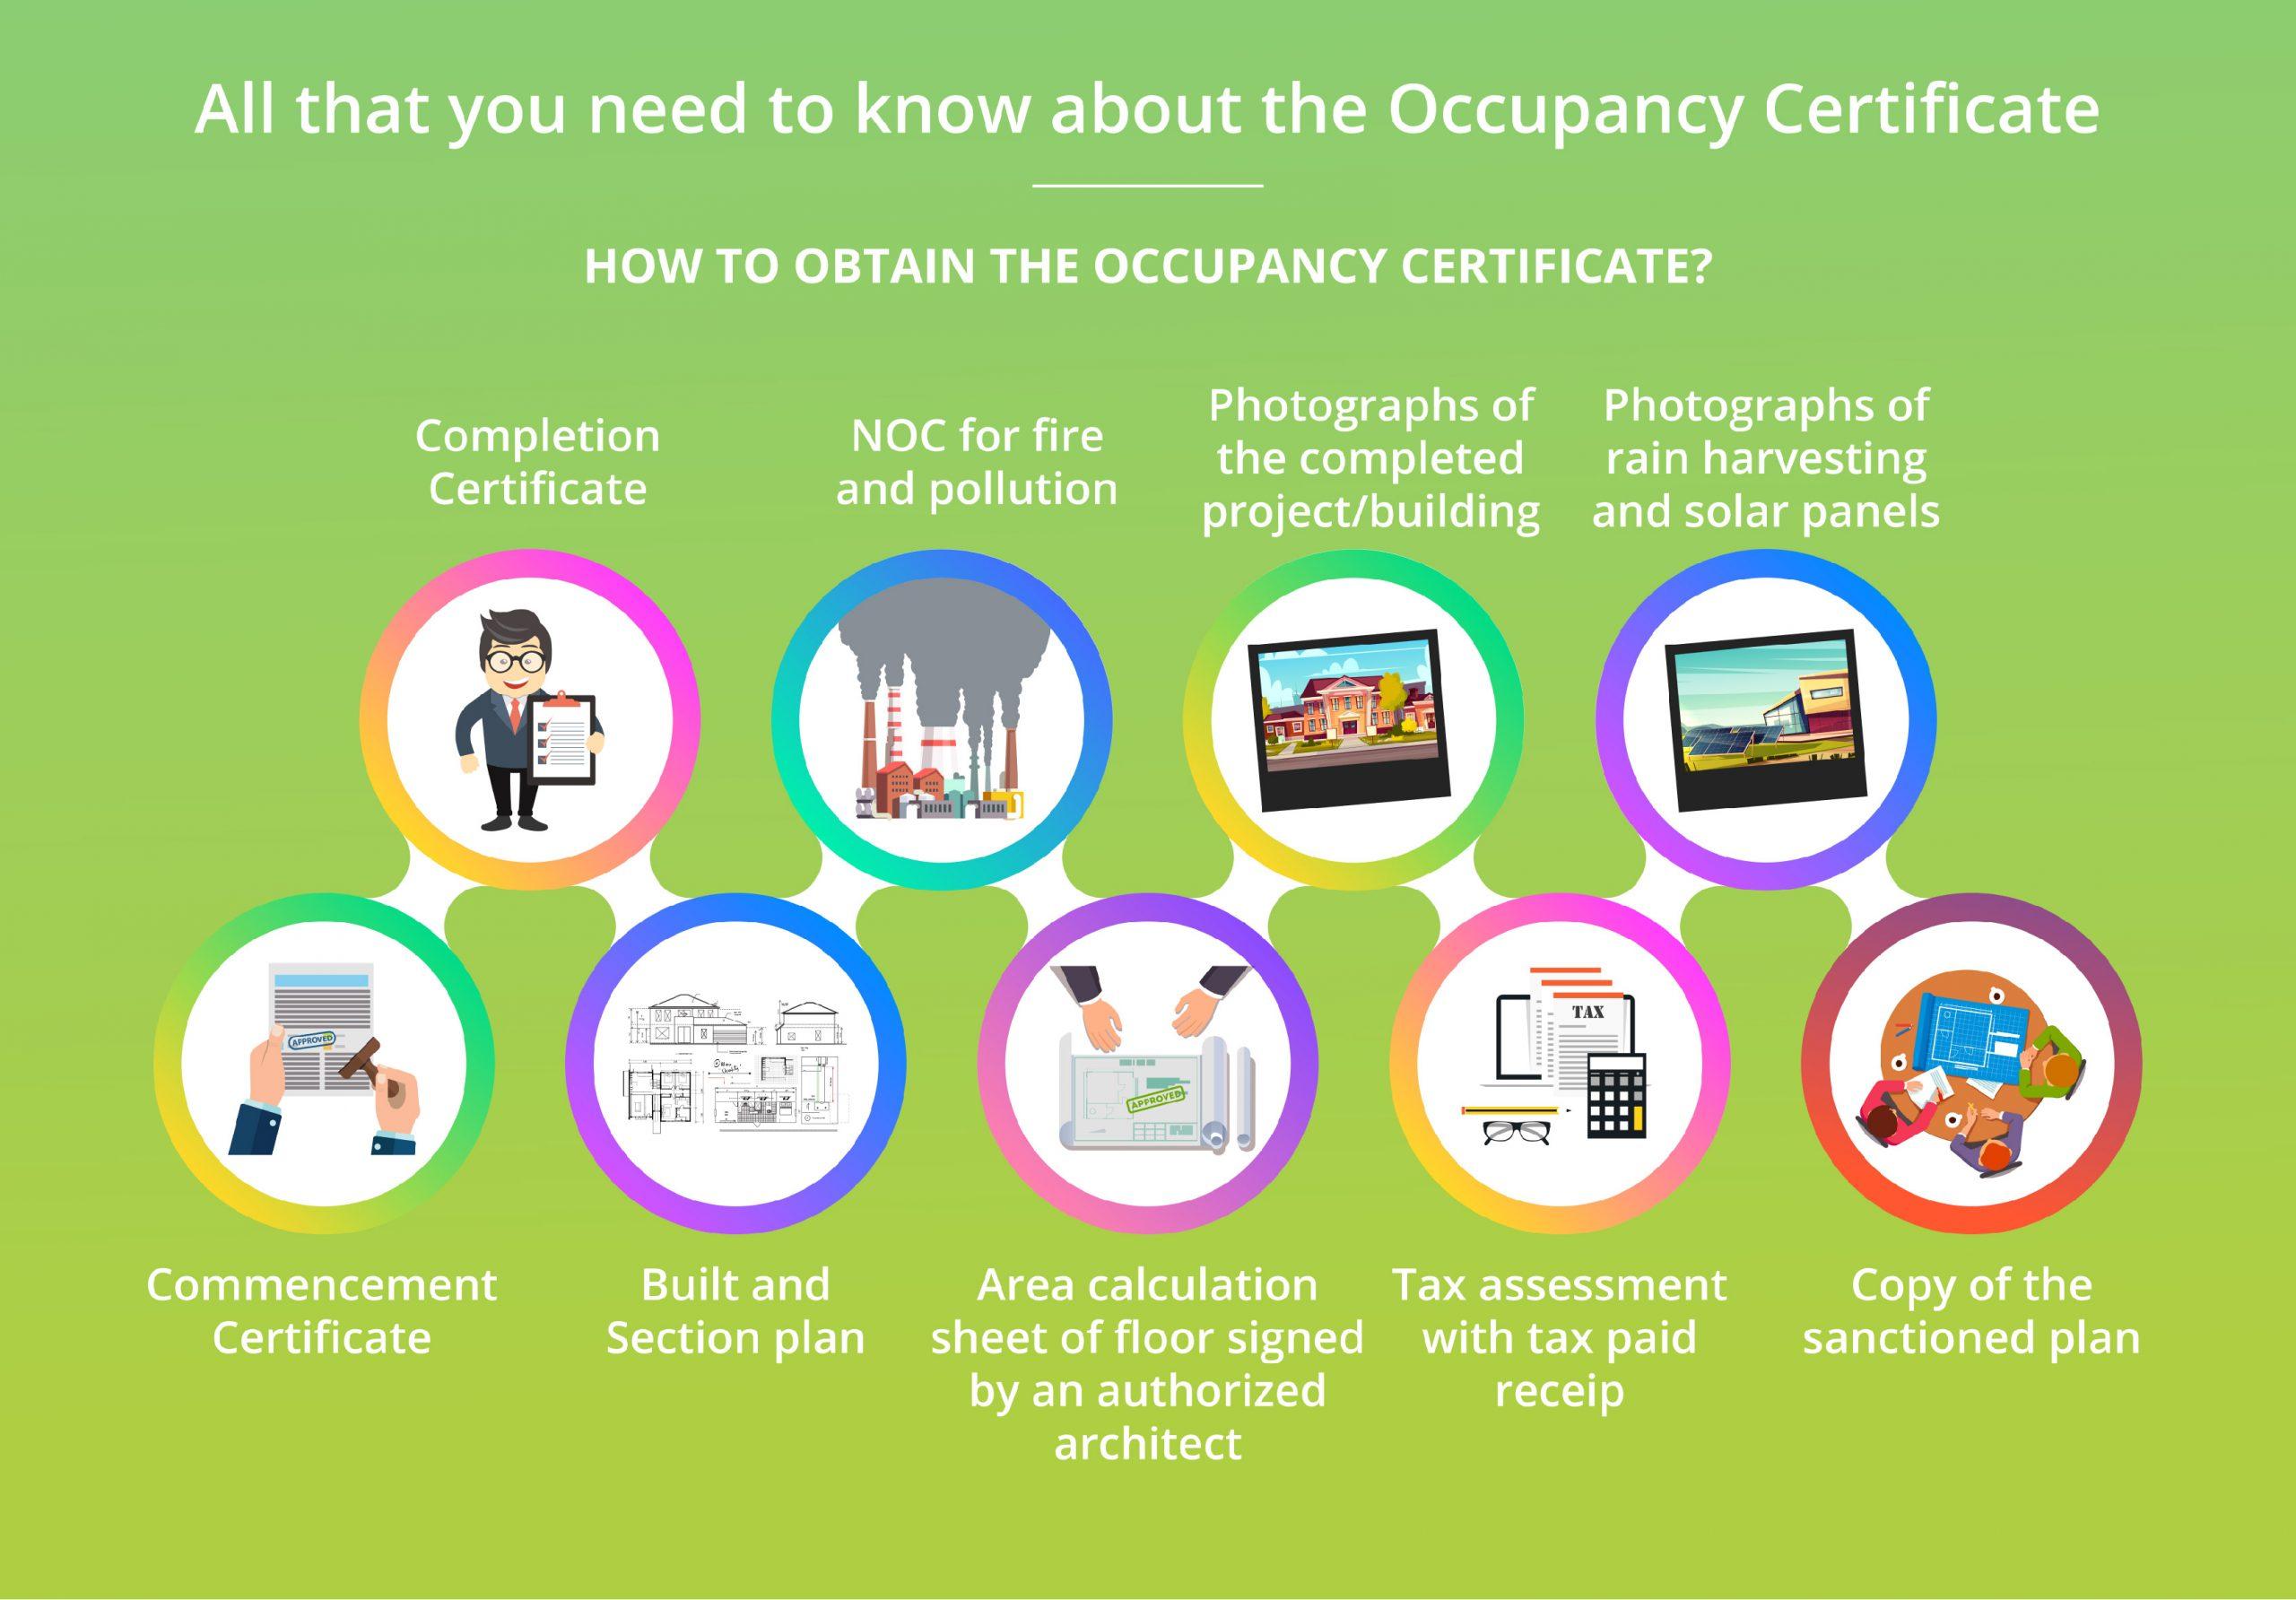 All that you need to know about the Occupancy Certificate